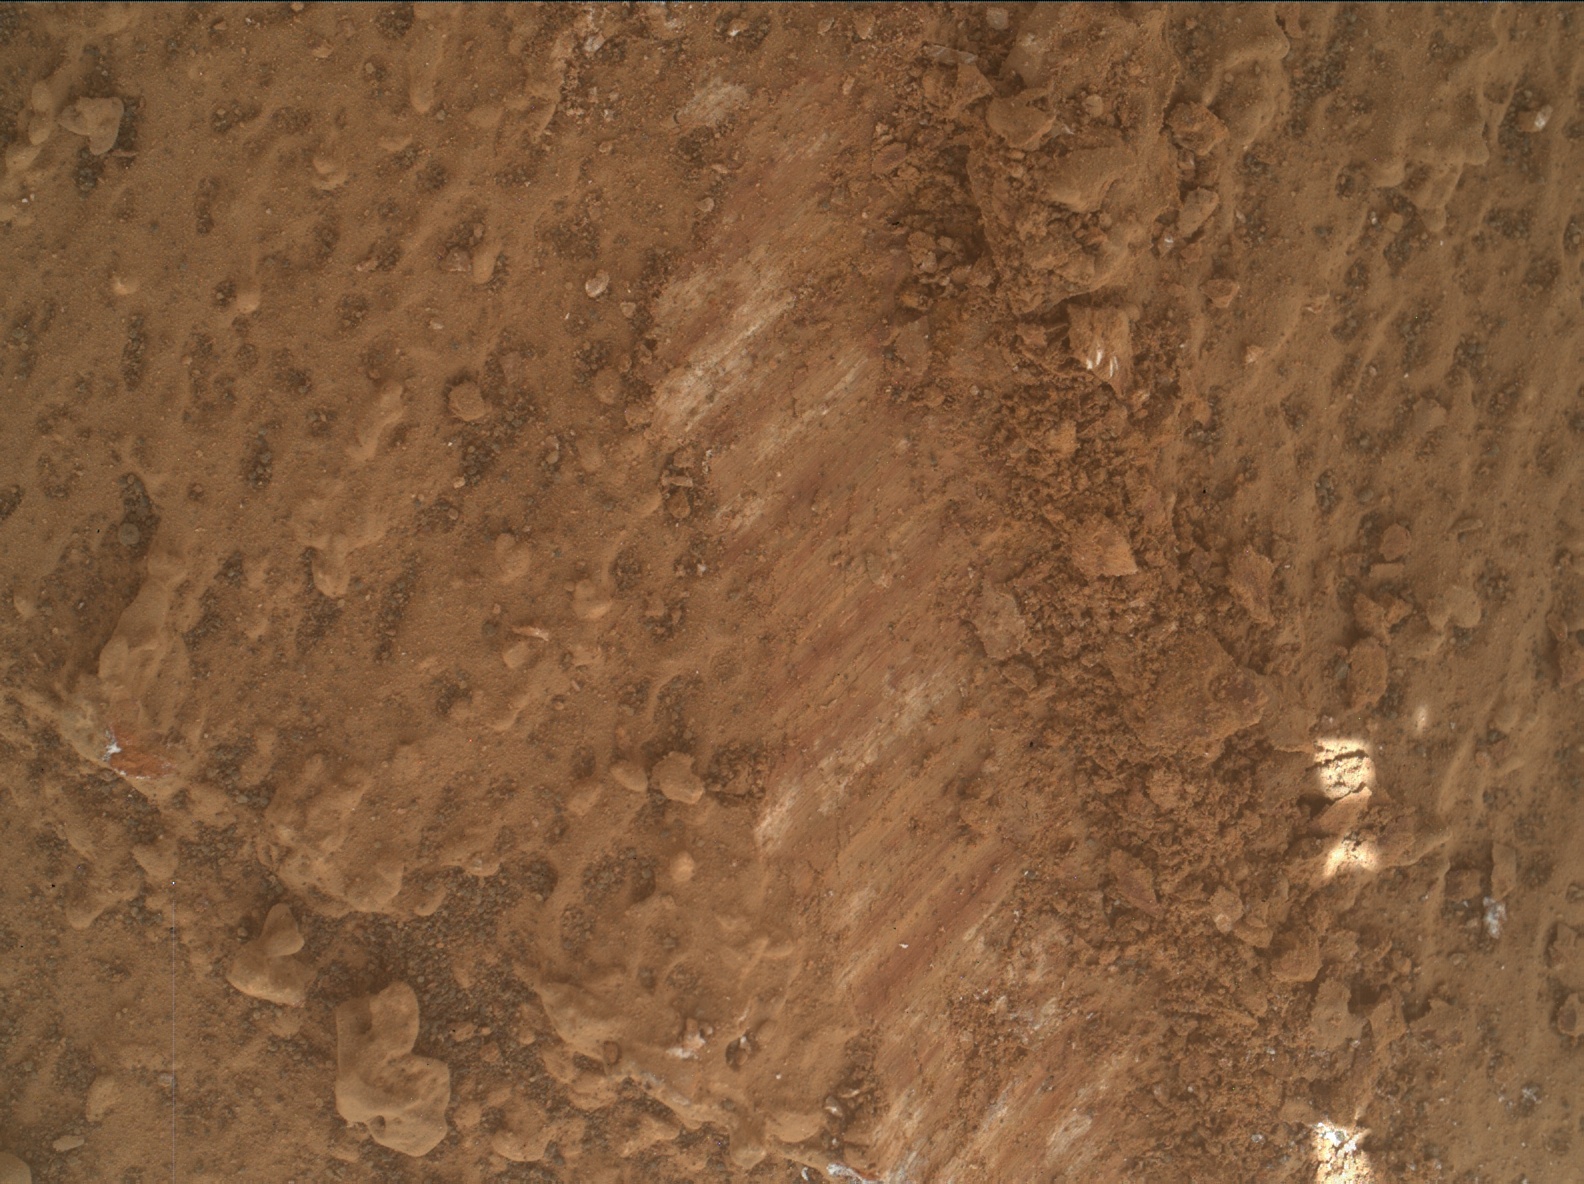 Nasa's Mars rover Curiosity acquired this image using its Mars Hand Lens Imager (MAHLI) on Sol 3274